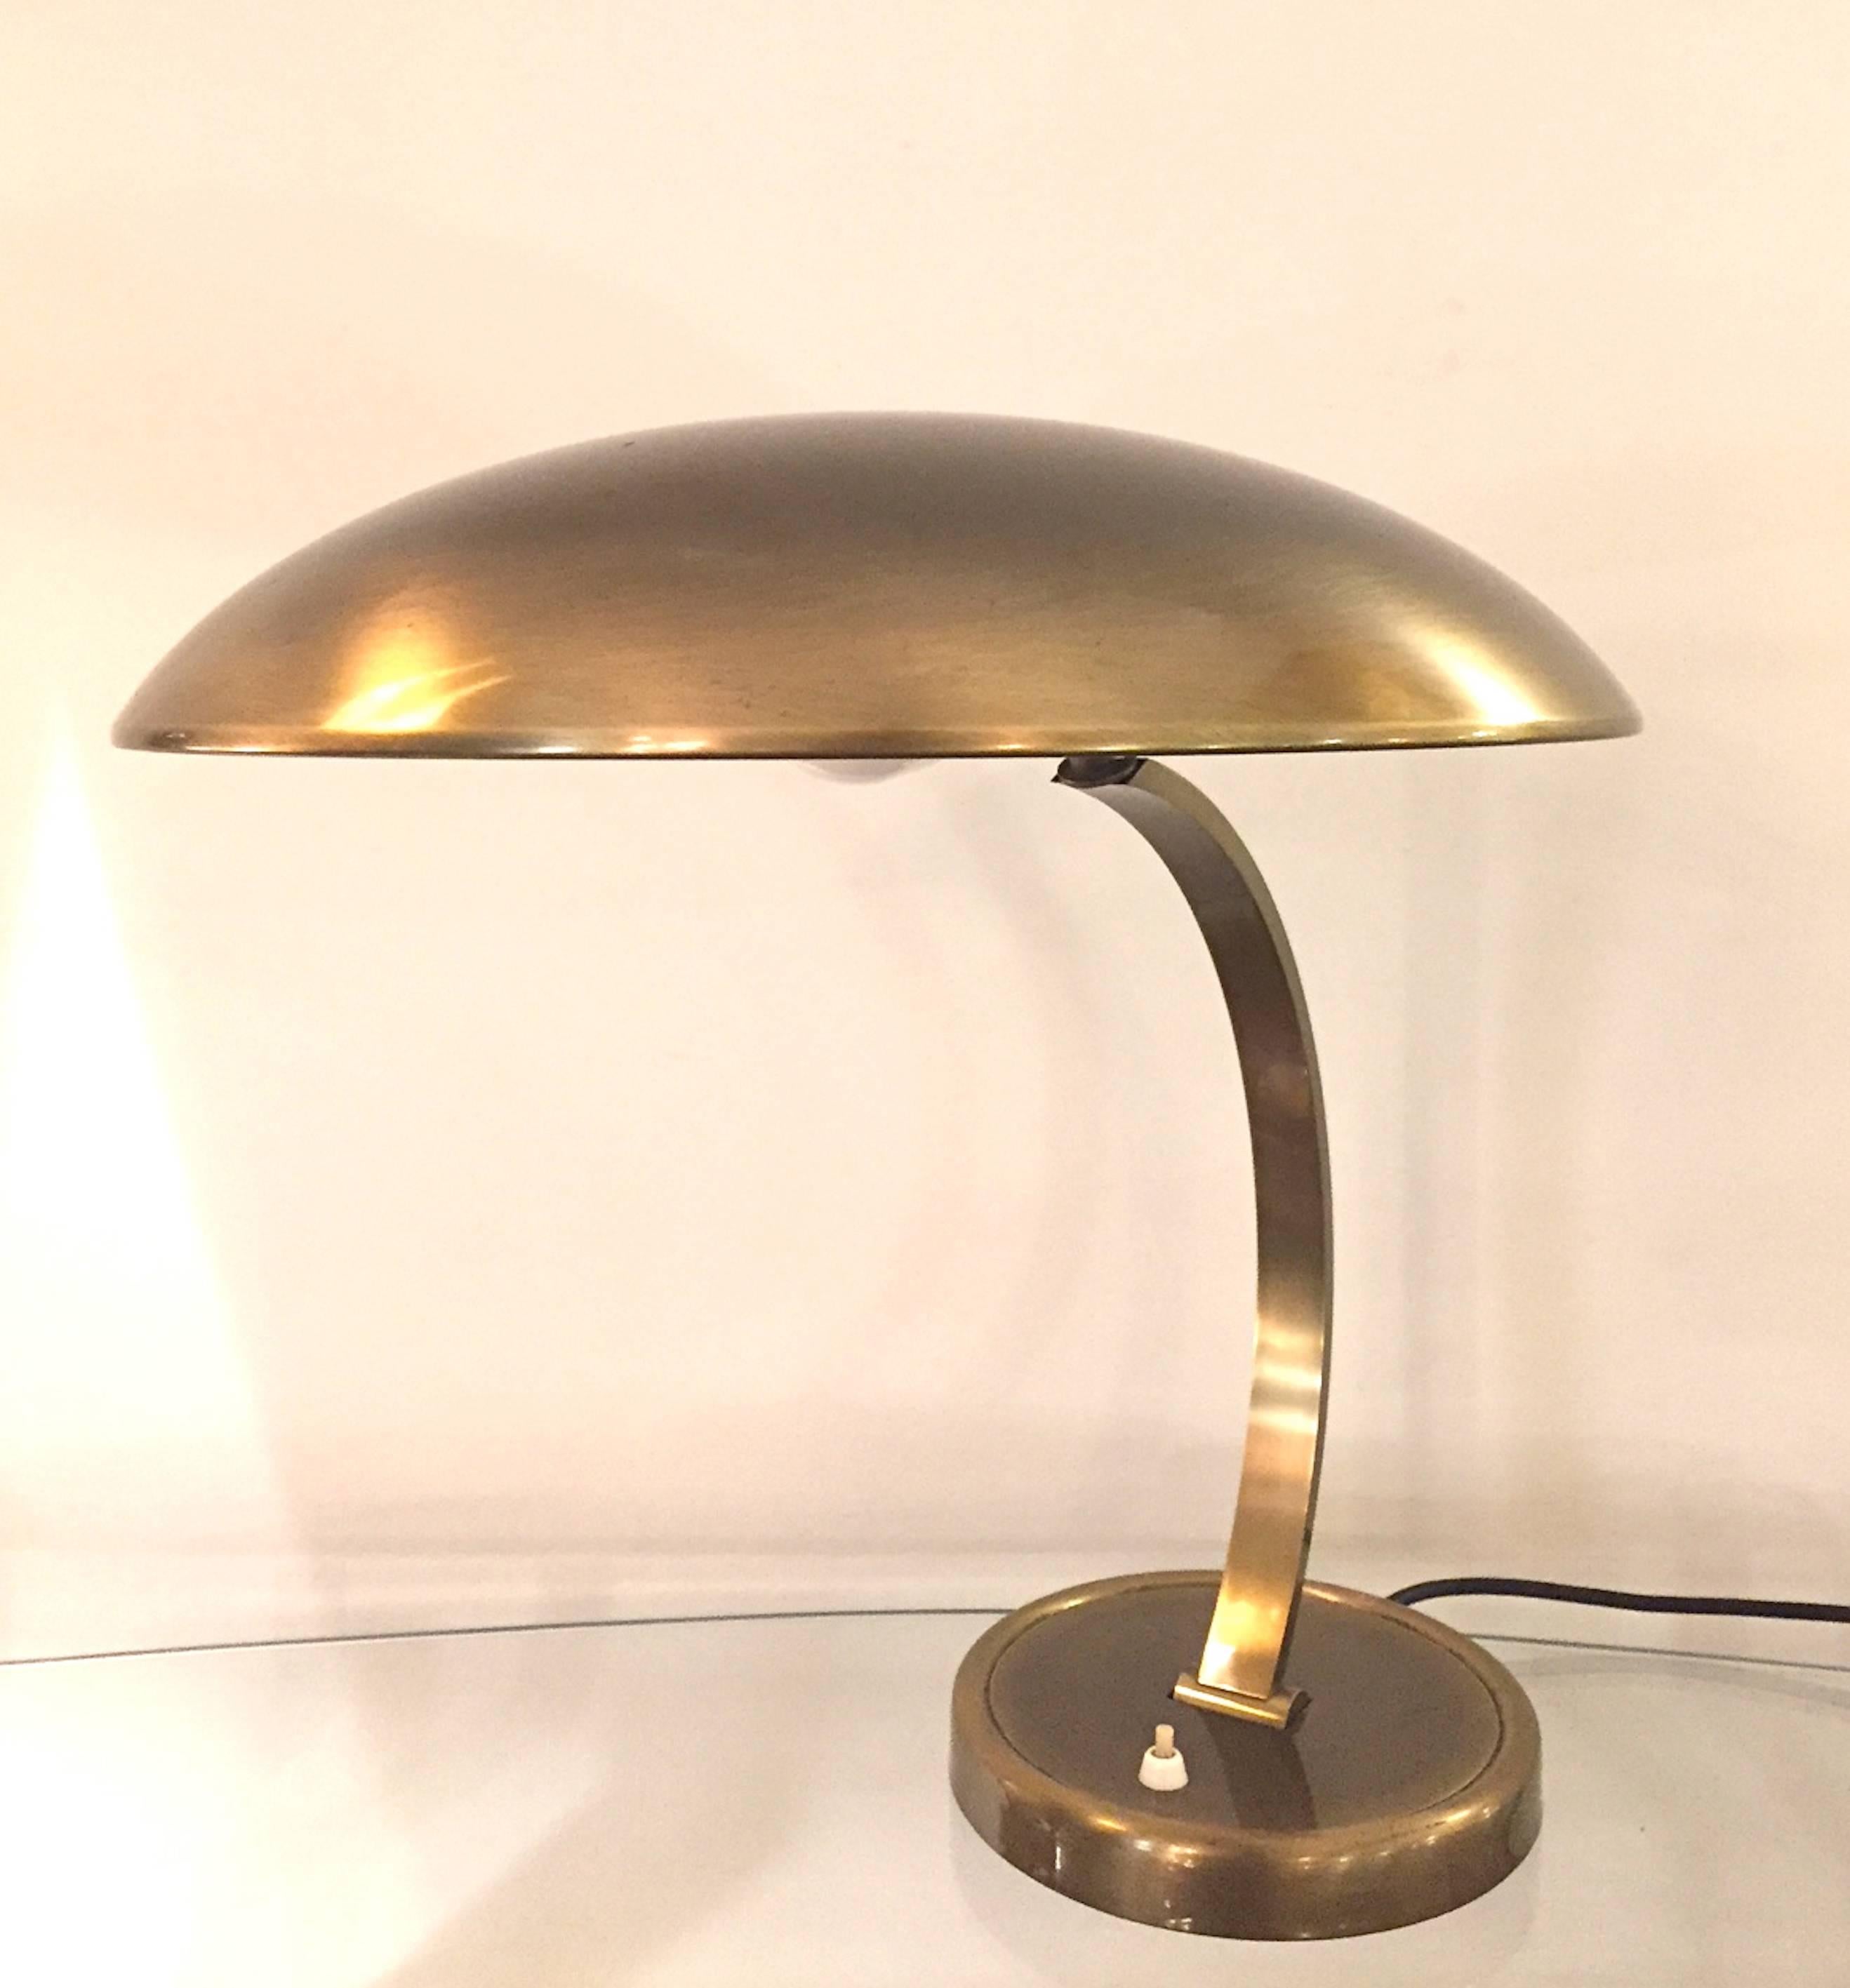 A table lamp designed by Cristian Dell, model 6751 and manufactured by Kaiser Idell. Brass. Both arms and shade are adjustable. Excellent condition.